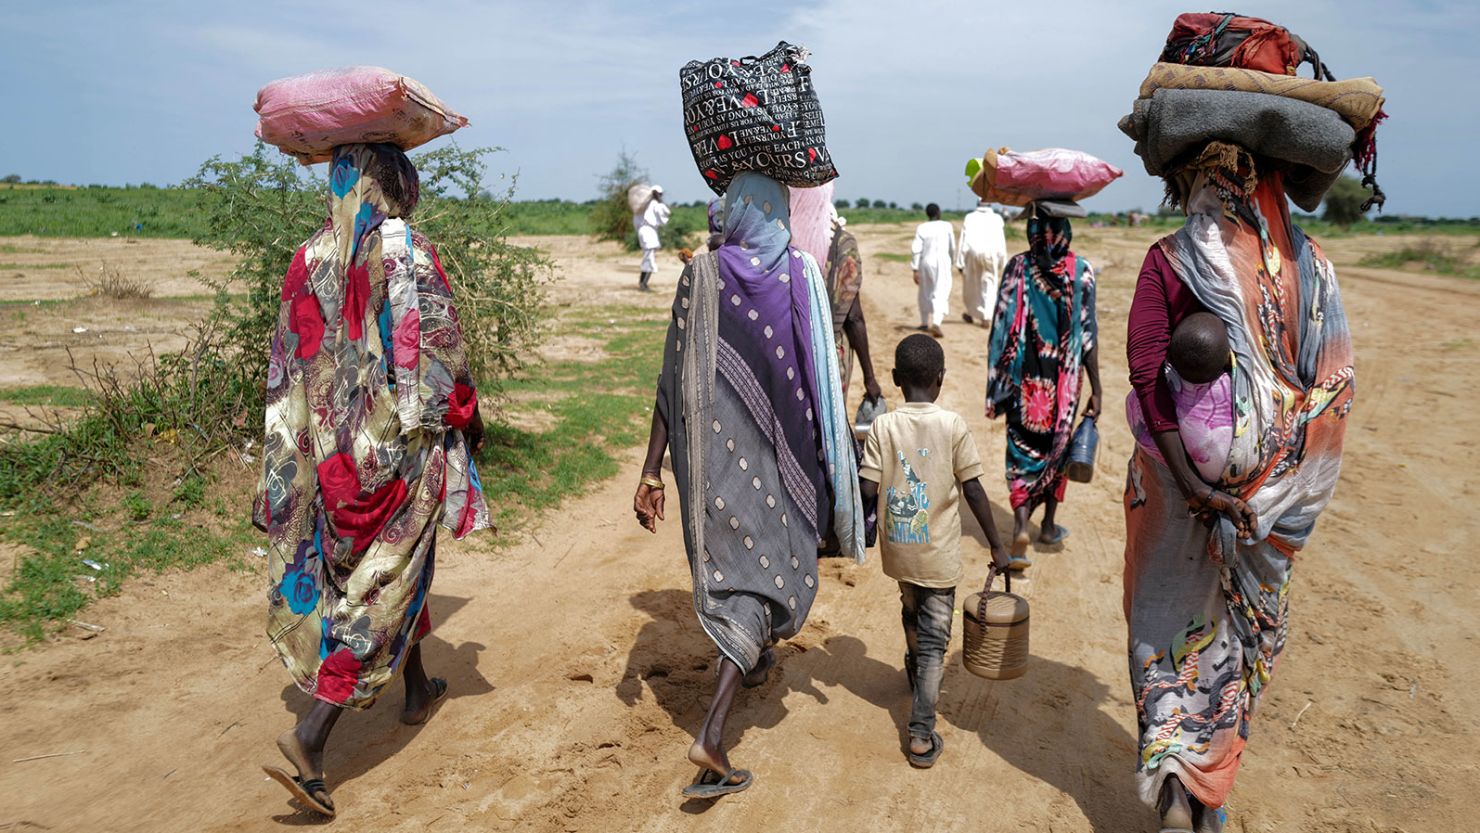 Sudanese people, who fled the conflict in Murnei in Sudan's Darfur region, walk upon crossing the border between Sudan and Chad in Adre, Chad August 2, 2023. REUTERS/Zohra Bensemra